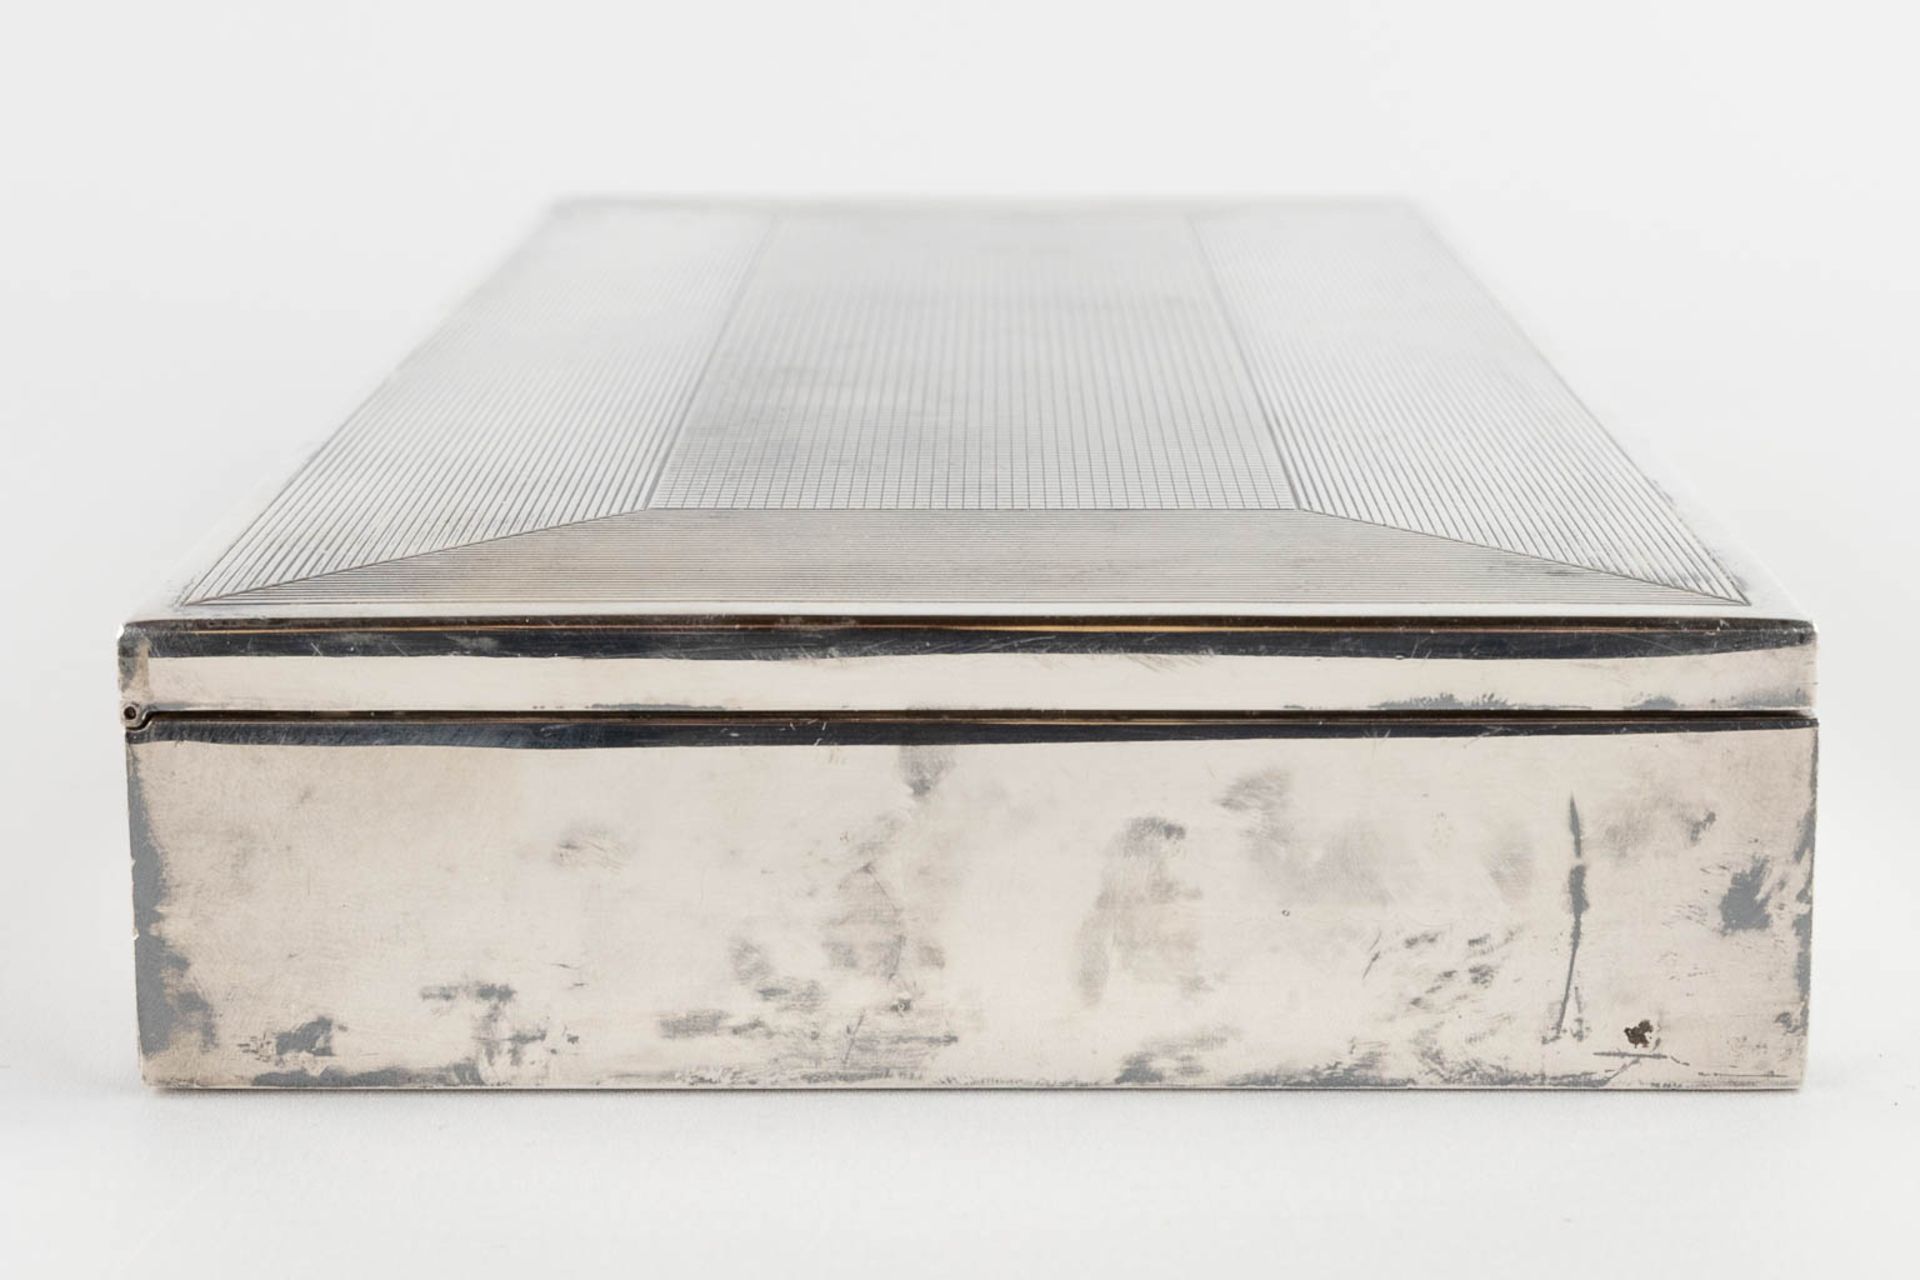 A storage box, silver and wood, Budapest, 835. 20th C. 970g. (D:14 x W:30 x H:4,5 cm) - Image 5 of 12